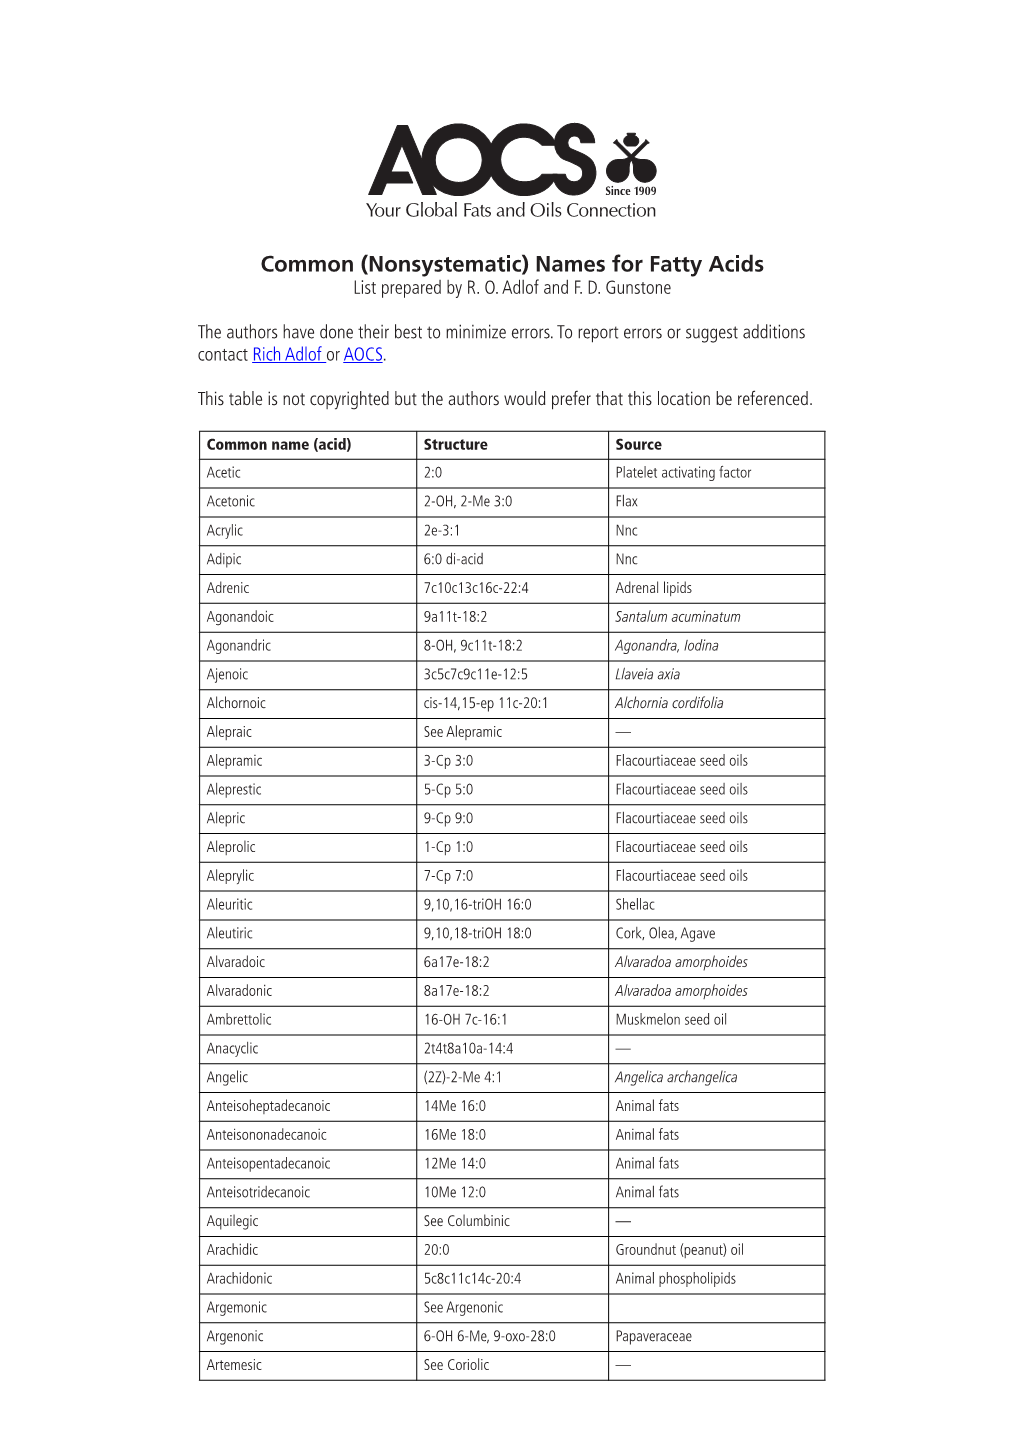 Common (Nonsystematic) Names for Fatty Acids List Prepared by R